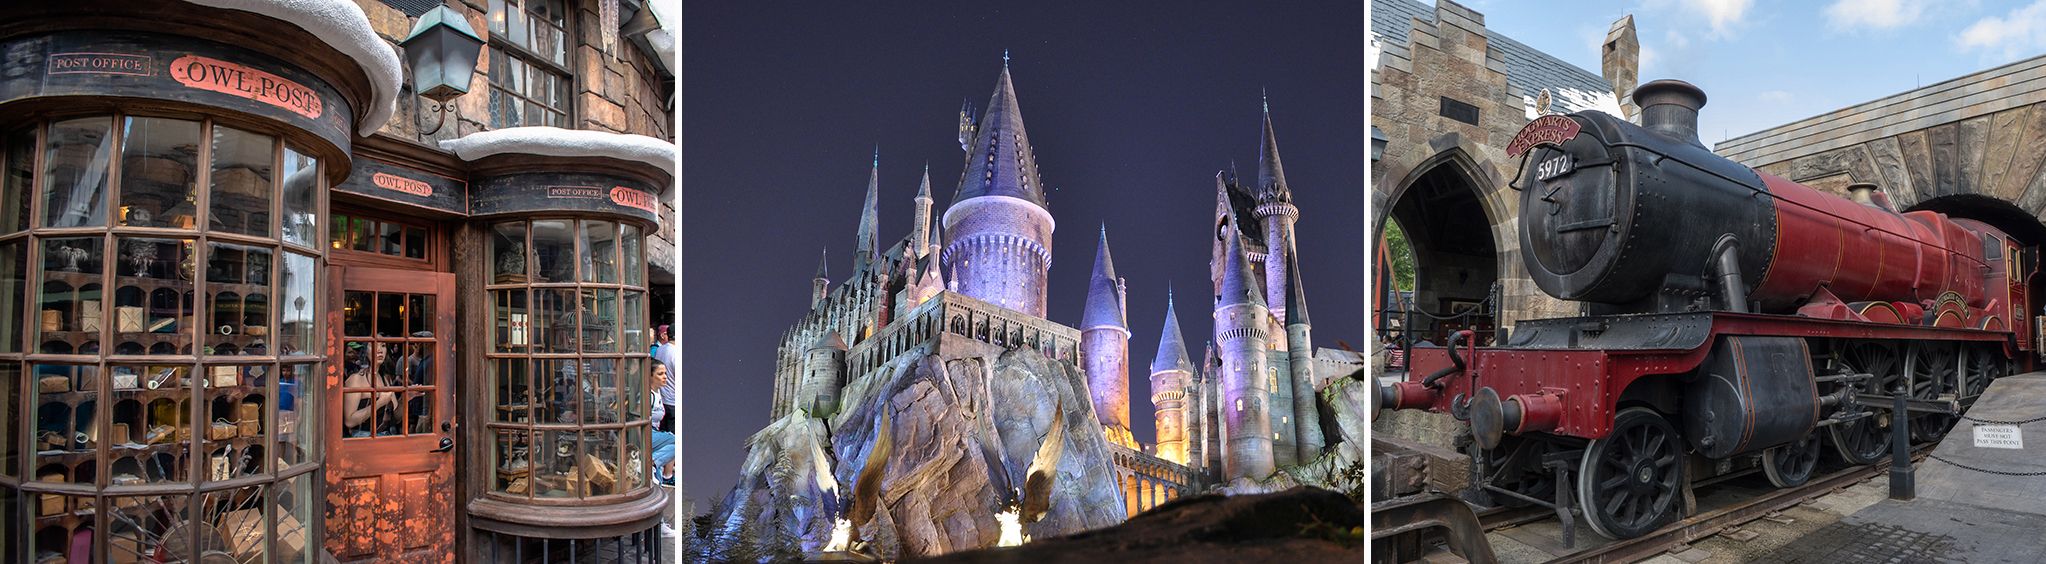 The Wizarding World of Harry Potter in Orlando, FL